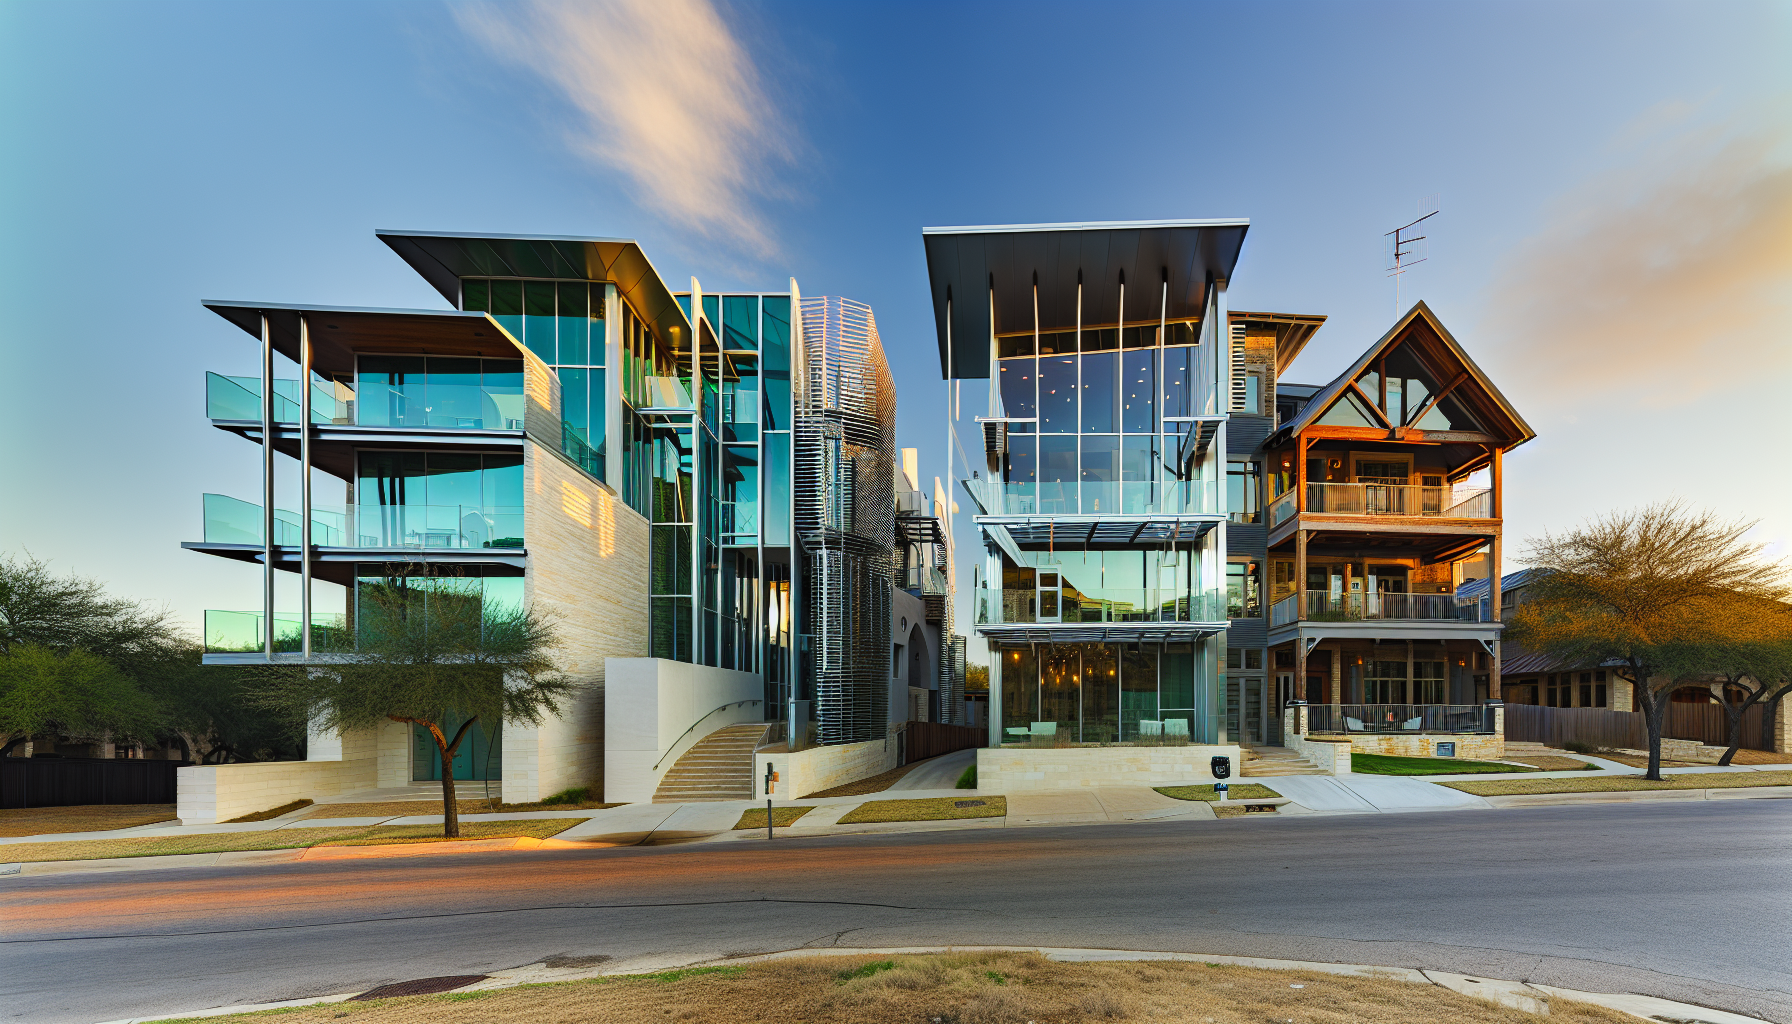 Contrast of modern and traditional architecture in Austin gated communities